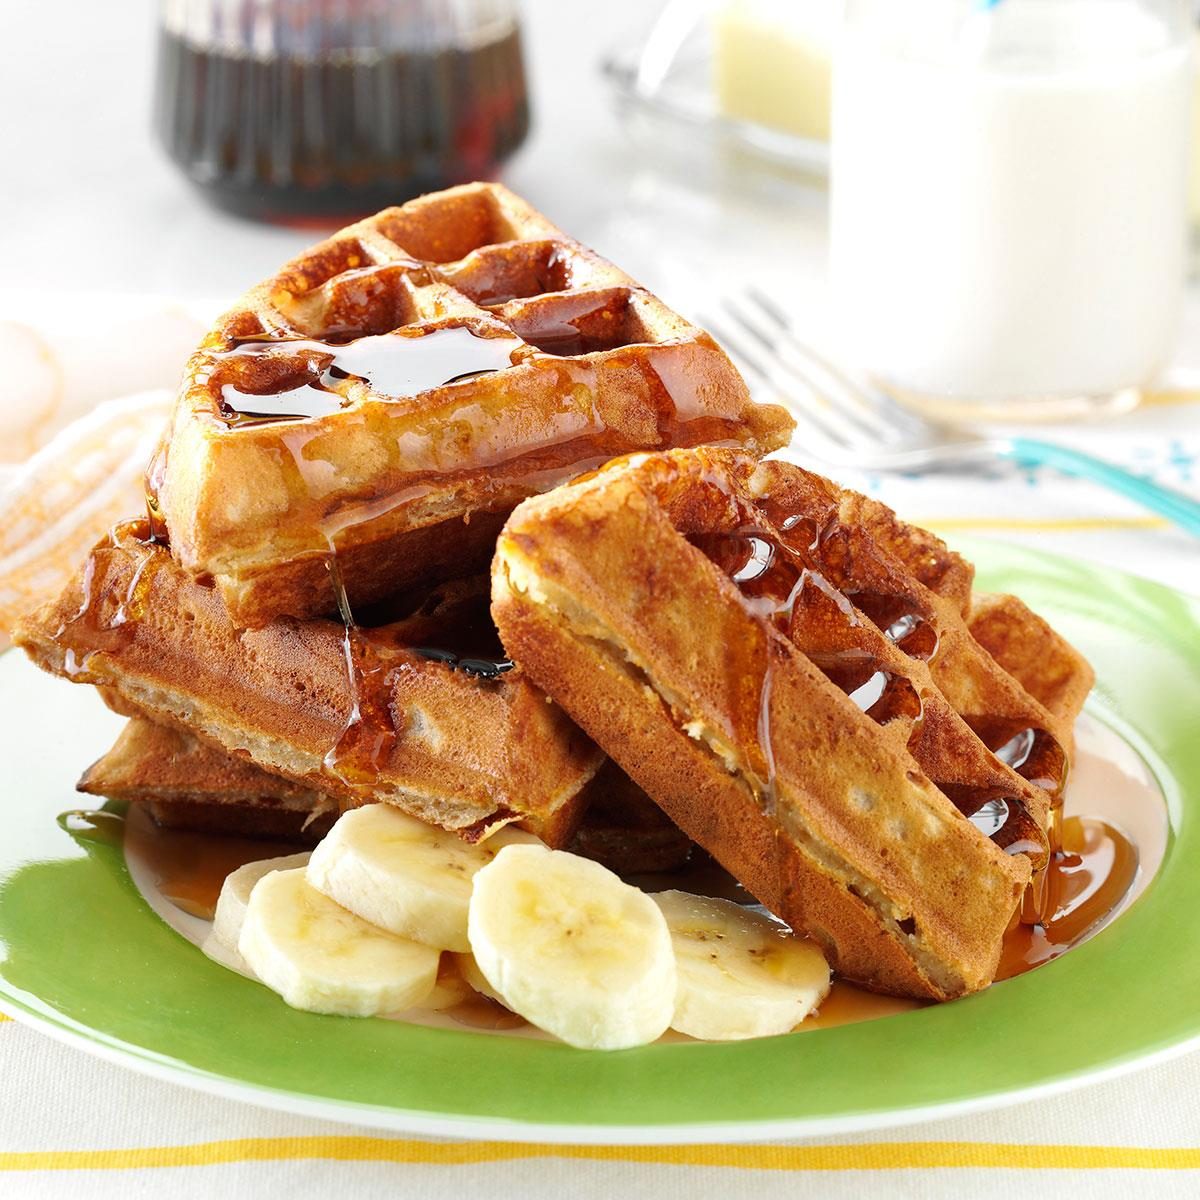 https://www.tasteofhome.com/wp-content/uploads/2018/01/Peanut-Butter-and-Banana-Waffles_exps173705_FM143298D03_14_5bC_RMS.jpg